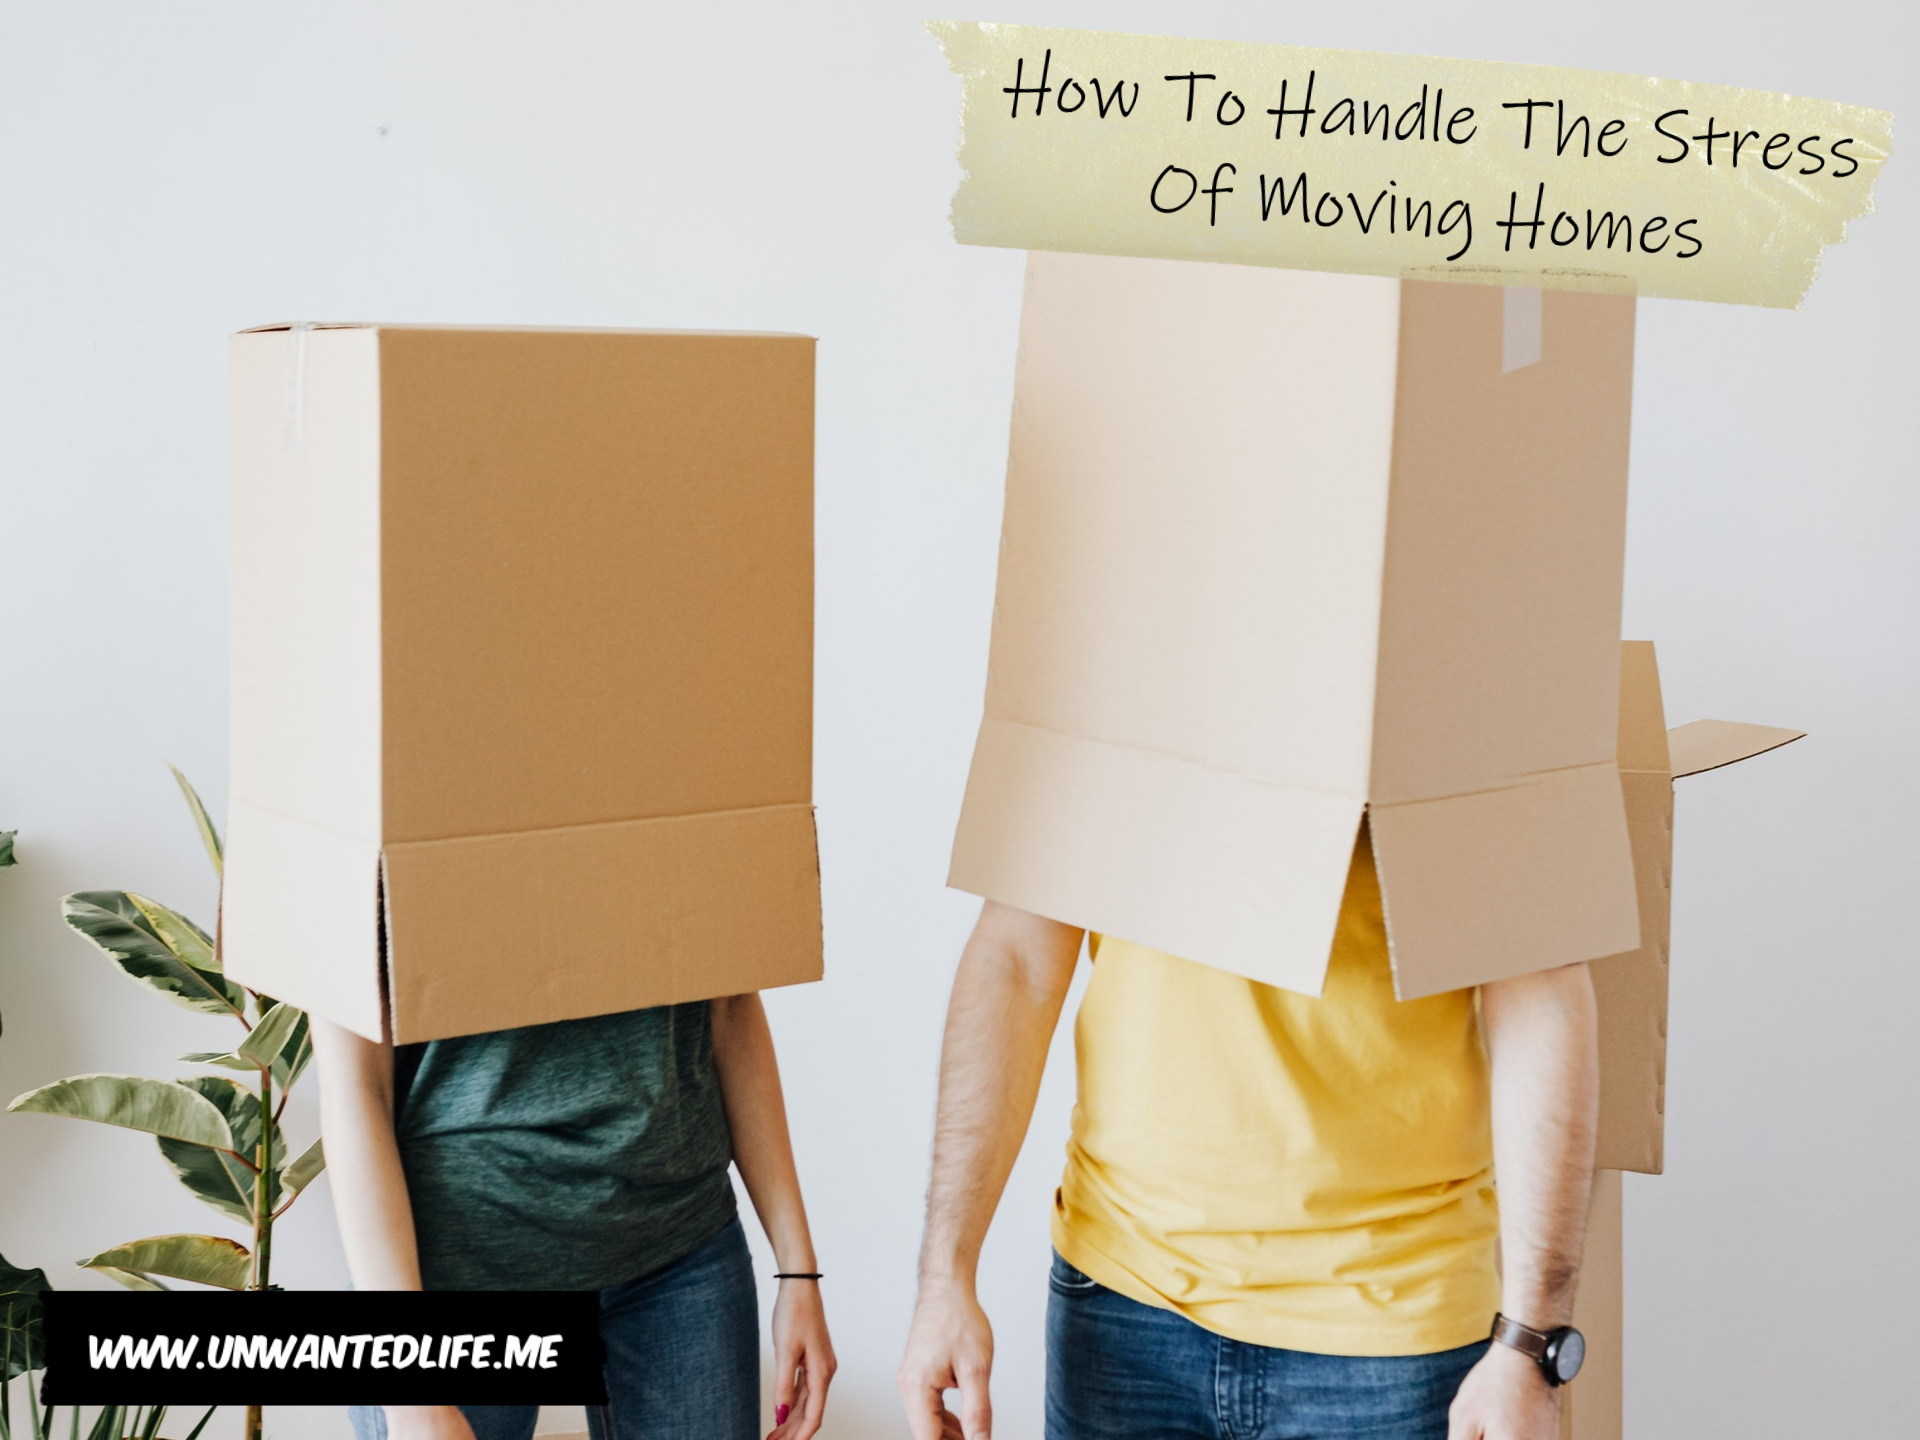 A photo of a White man and woman with moving boxes on their heads to represent the topic of the article - How To Handle The Stress Of Moving Homes